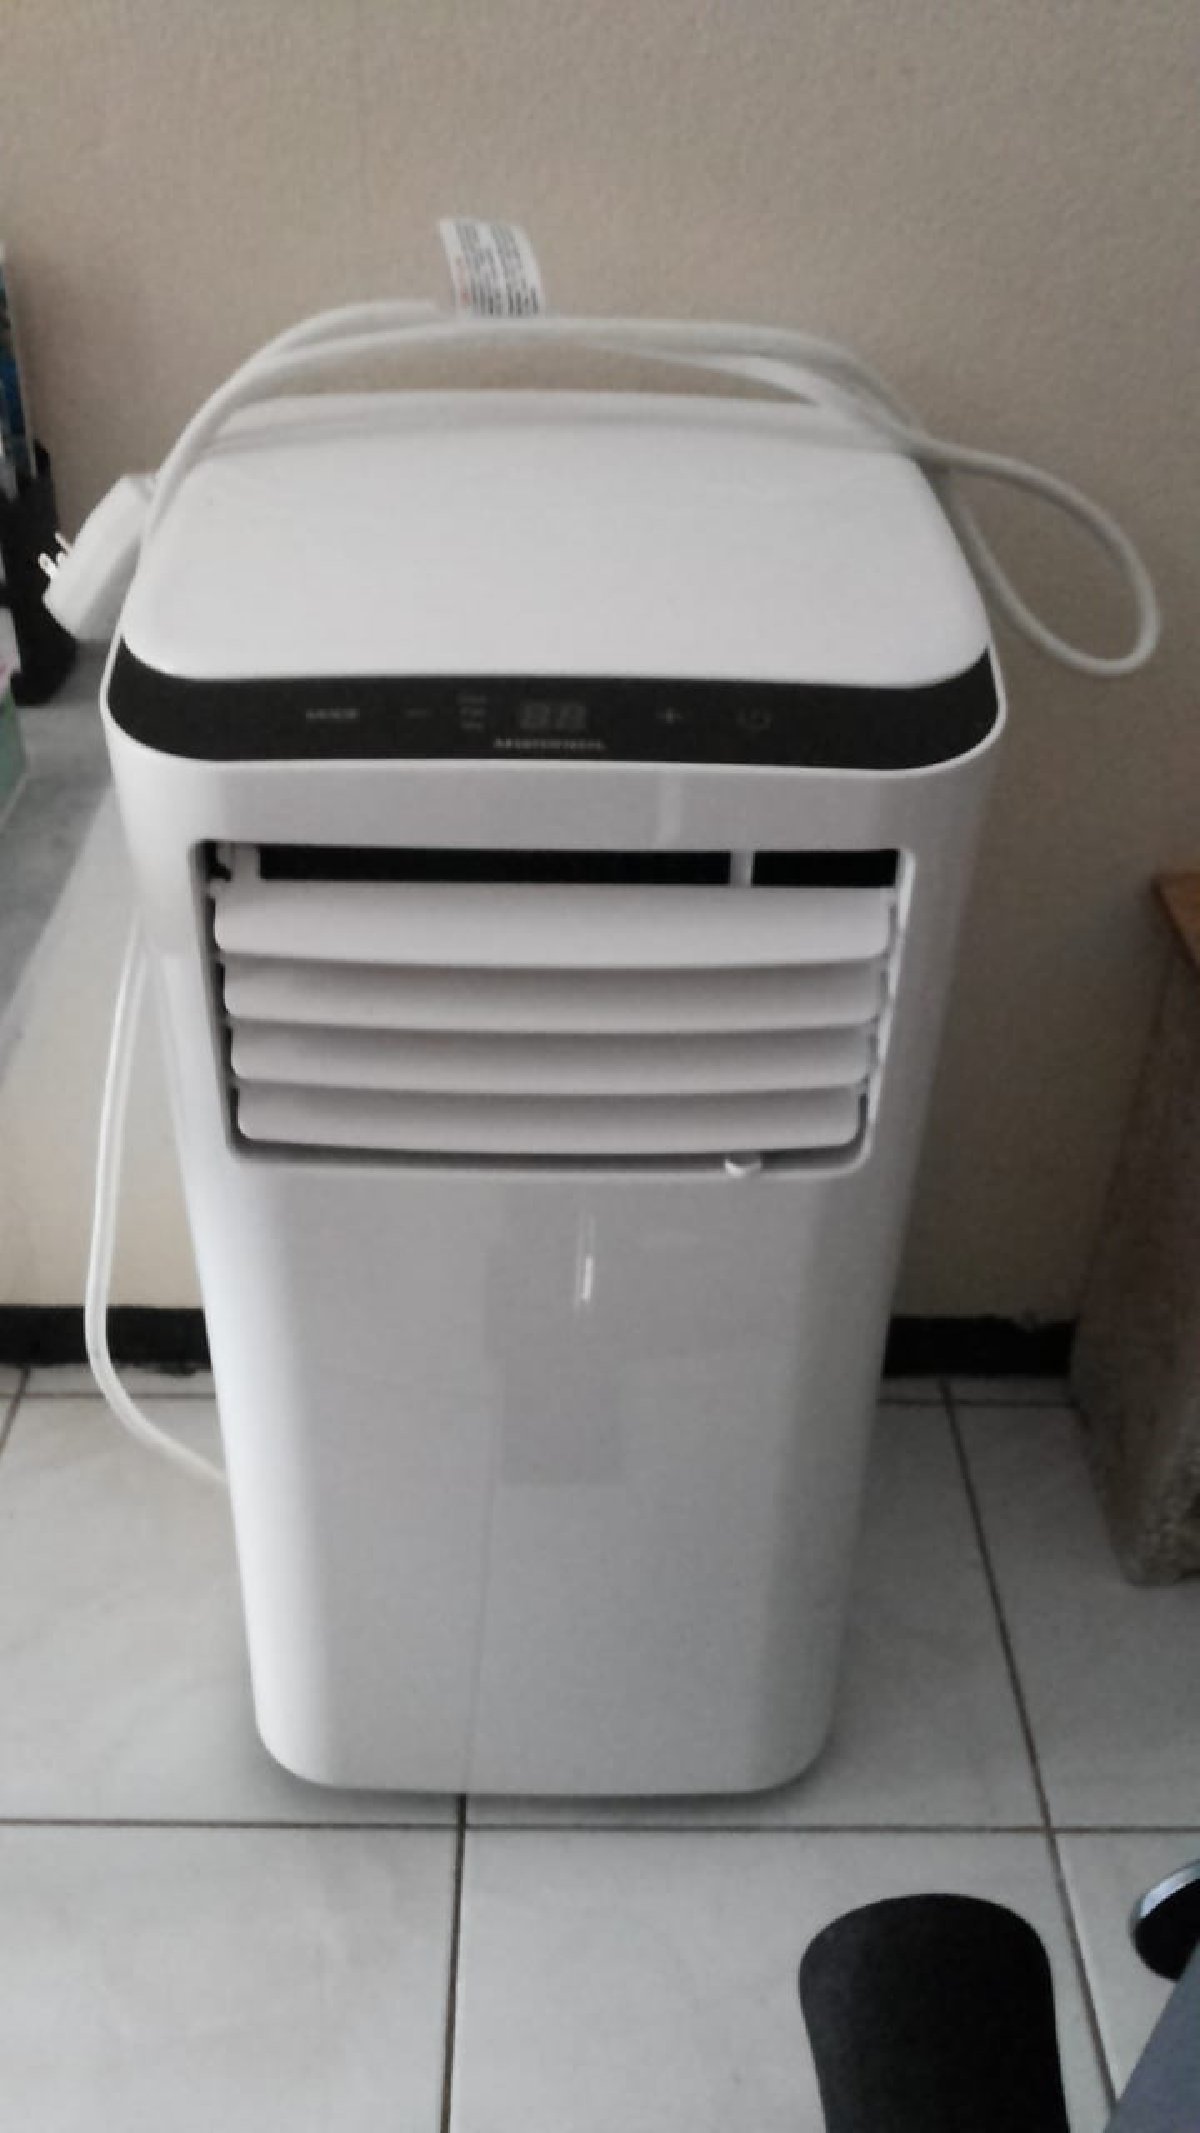 Mastertech 10,000 Btu Portable Air Conditioner for sale in Norbrook